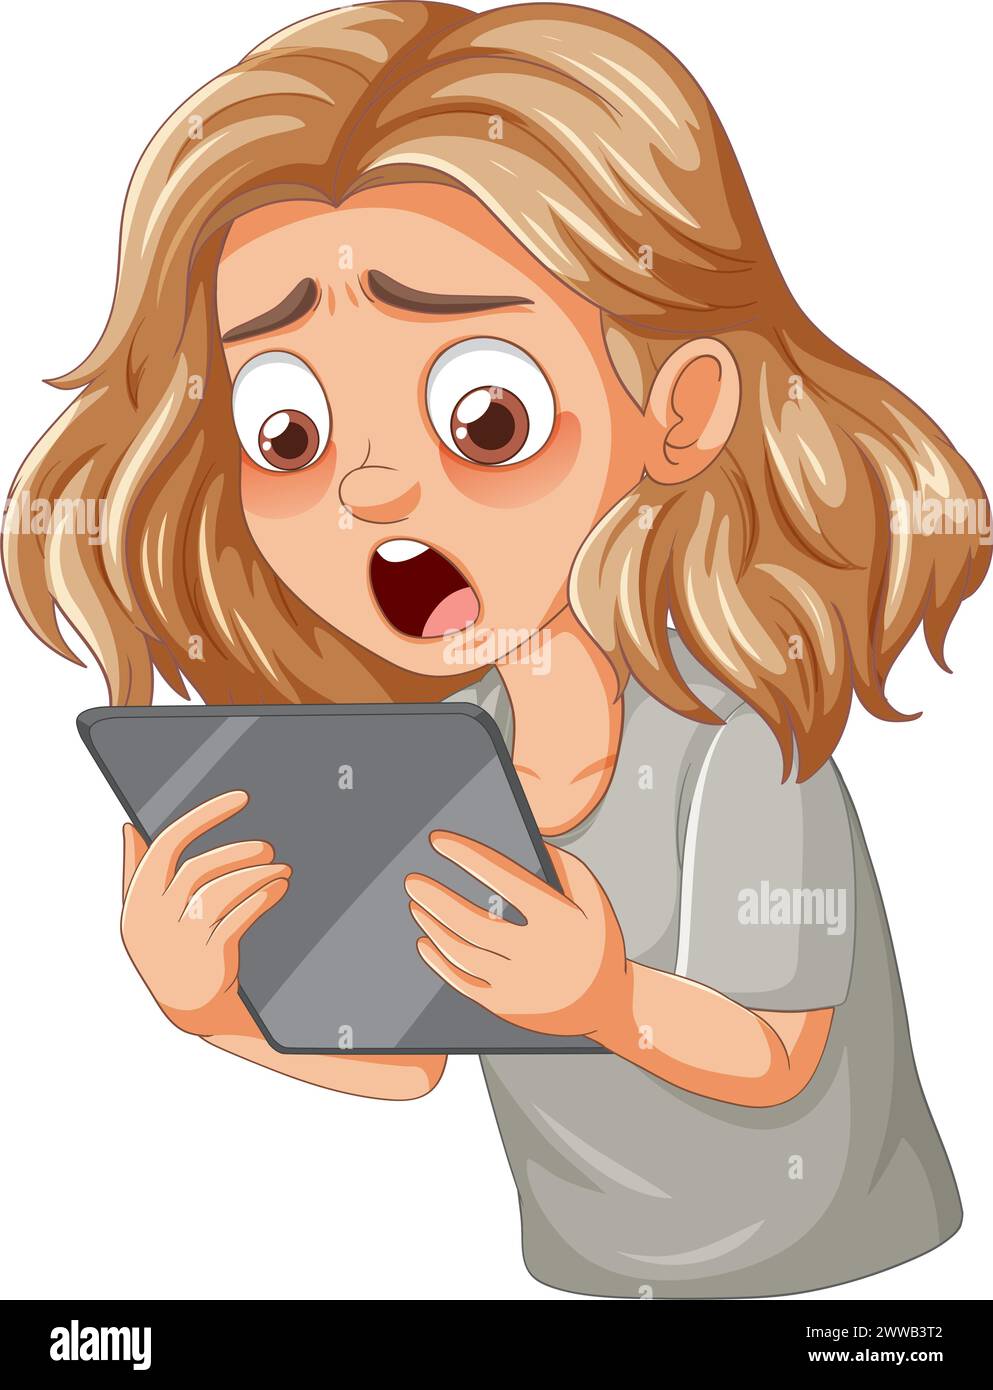 Cartoon of a girl surprised while using a tablet Stock Vector